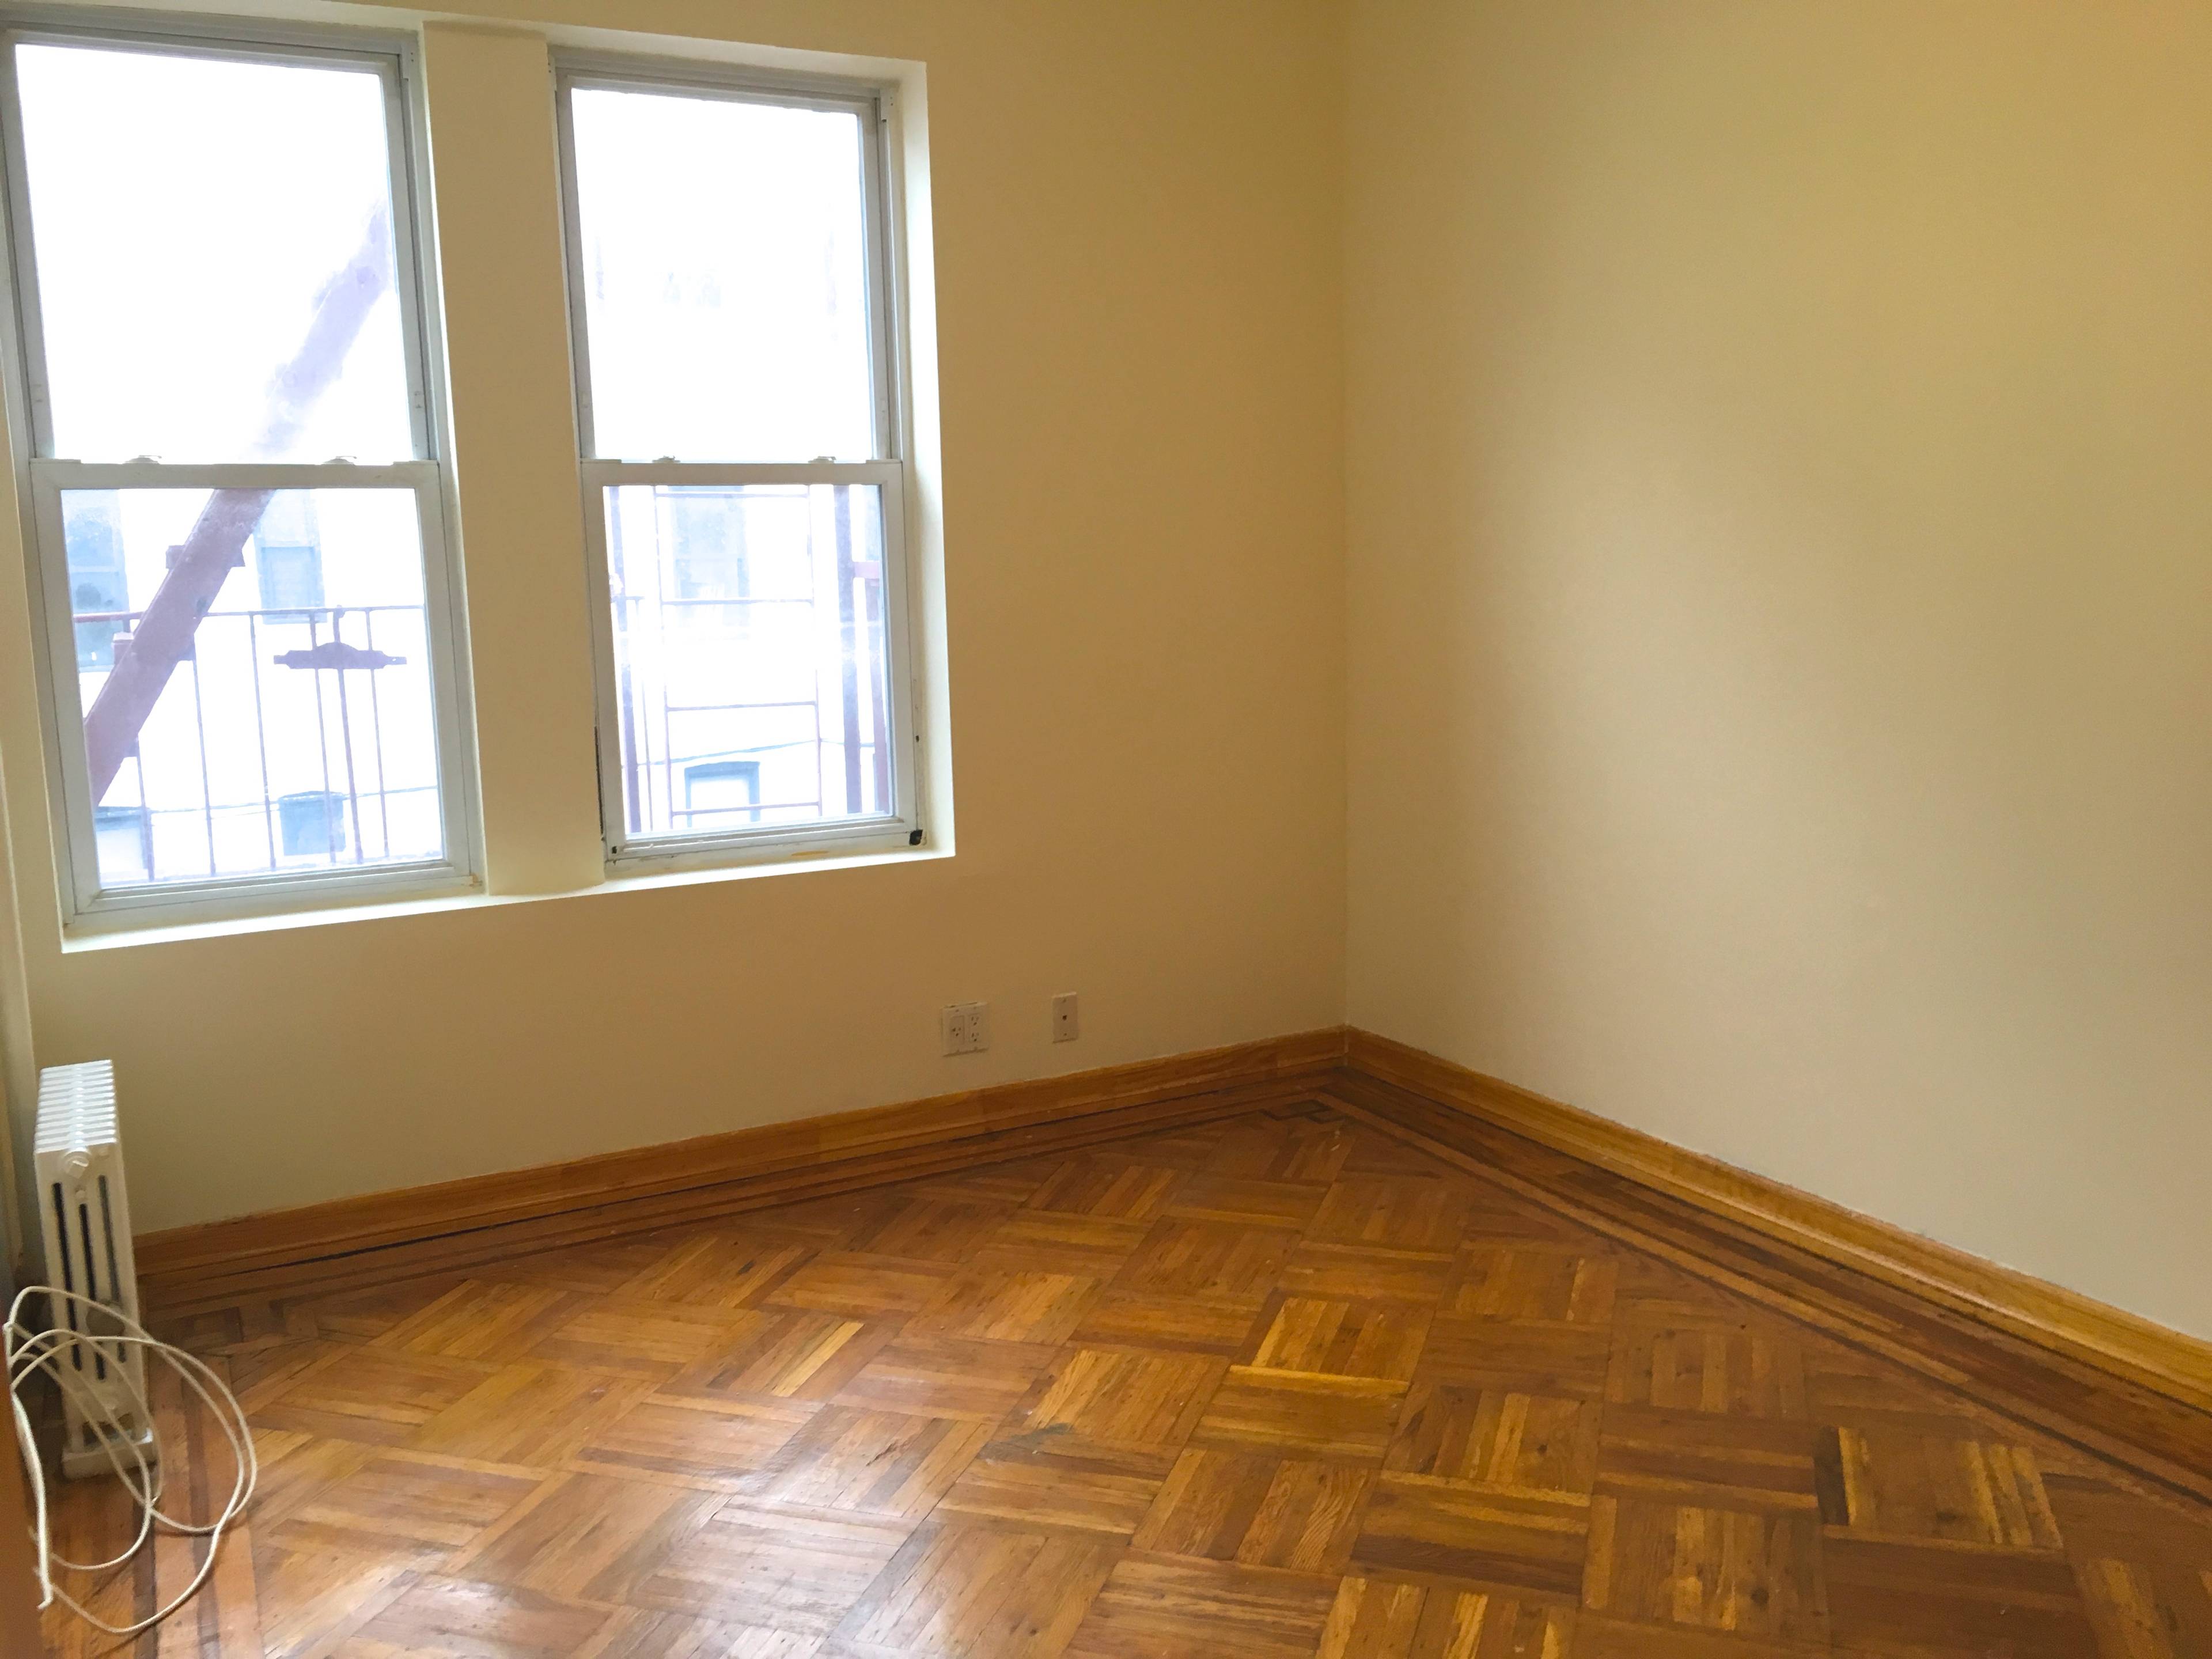 Astoria: Queen Sized 2 Bedroom Conveniently Located Off 30th Avenue & Crescent Street